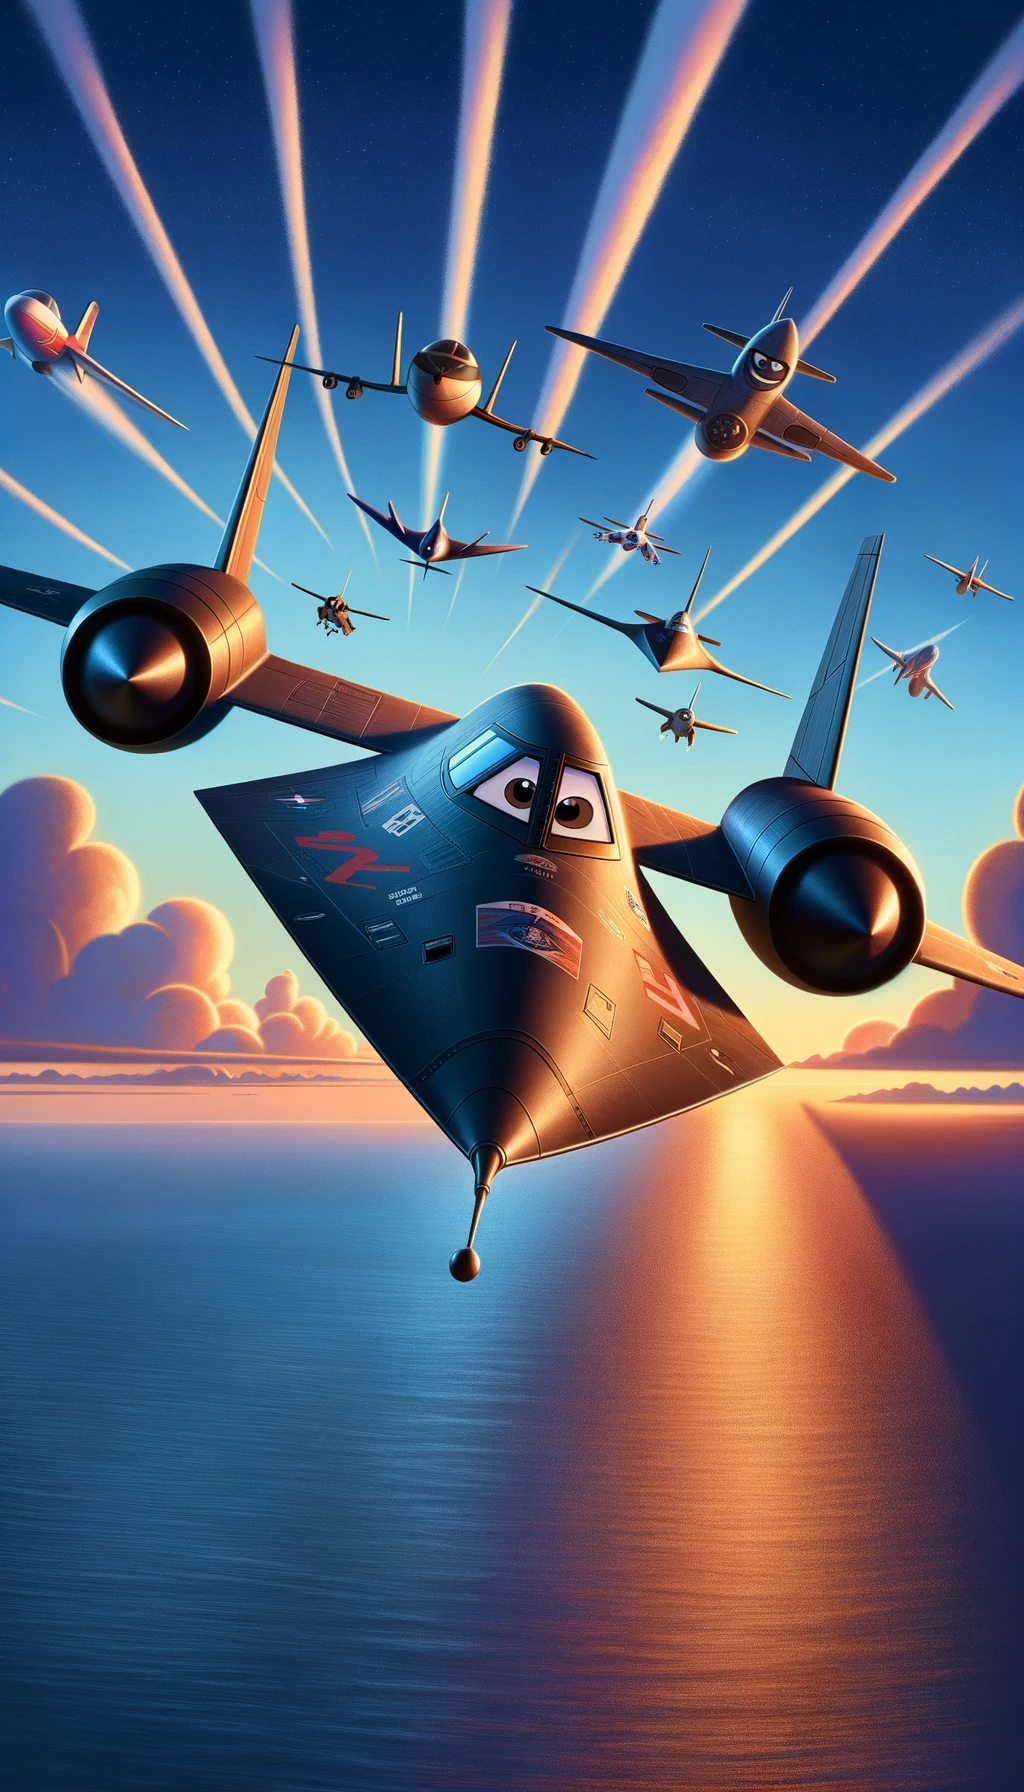 A movie poster in the style of Pixar animation featuring the Lockheed SR-71 Blackbird. The aircraft is characterized with a friendly and brave face on the nose, cartoonish in nature, to fit the Pixar aesthetic. It's flying over a picturesque ocean with a sunset backdrop, casting a heroic shadow on the water below. The title of the movie is playfully written in the sky with contrails, and a supporting cast of various animated aircraft characters is flying in formation with the Blackbird.